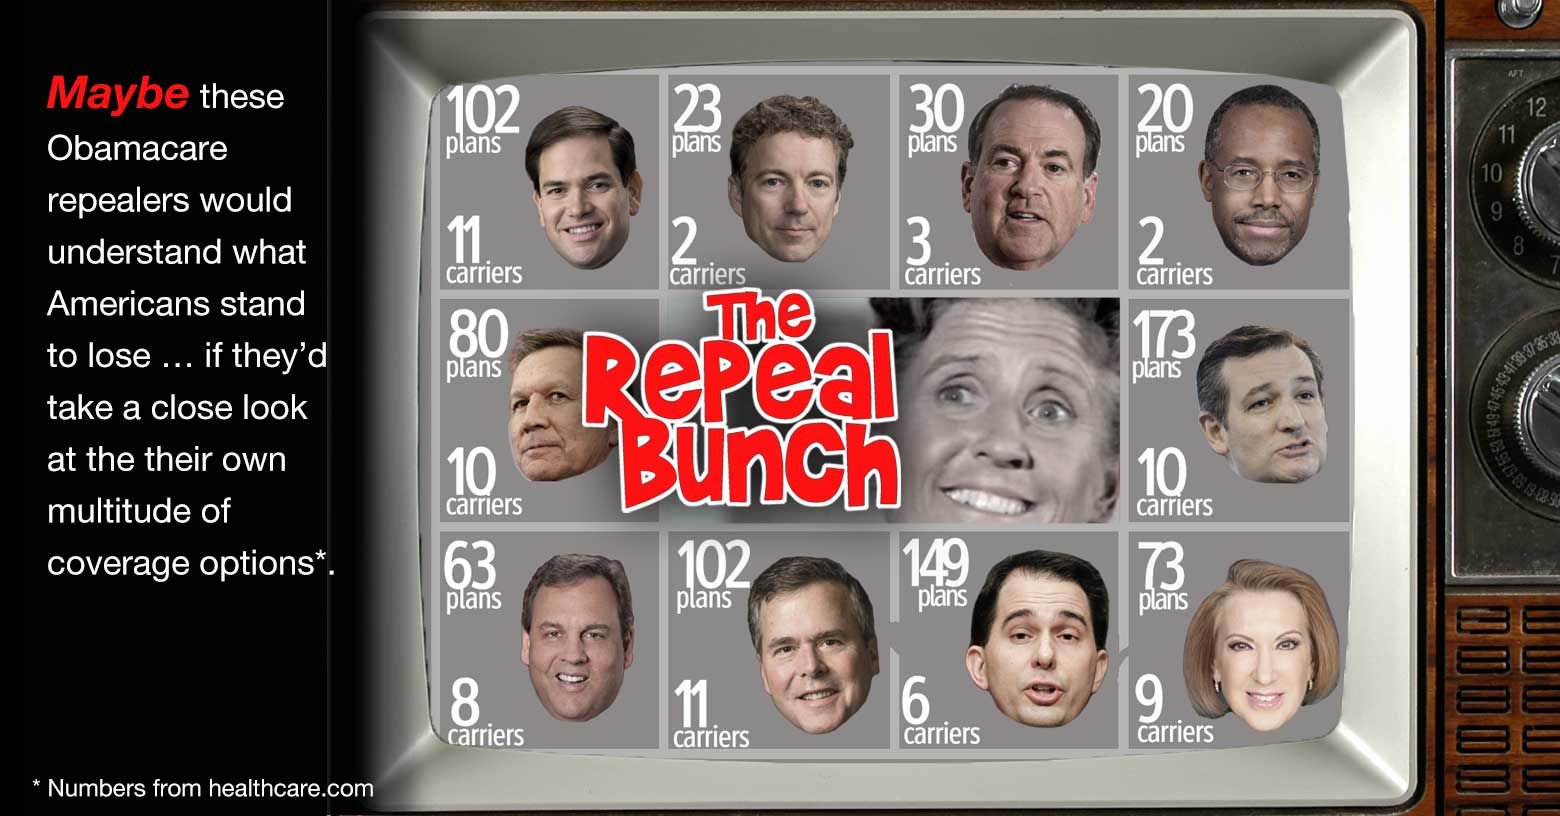 The GOP repeal bunch.